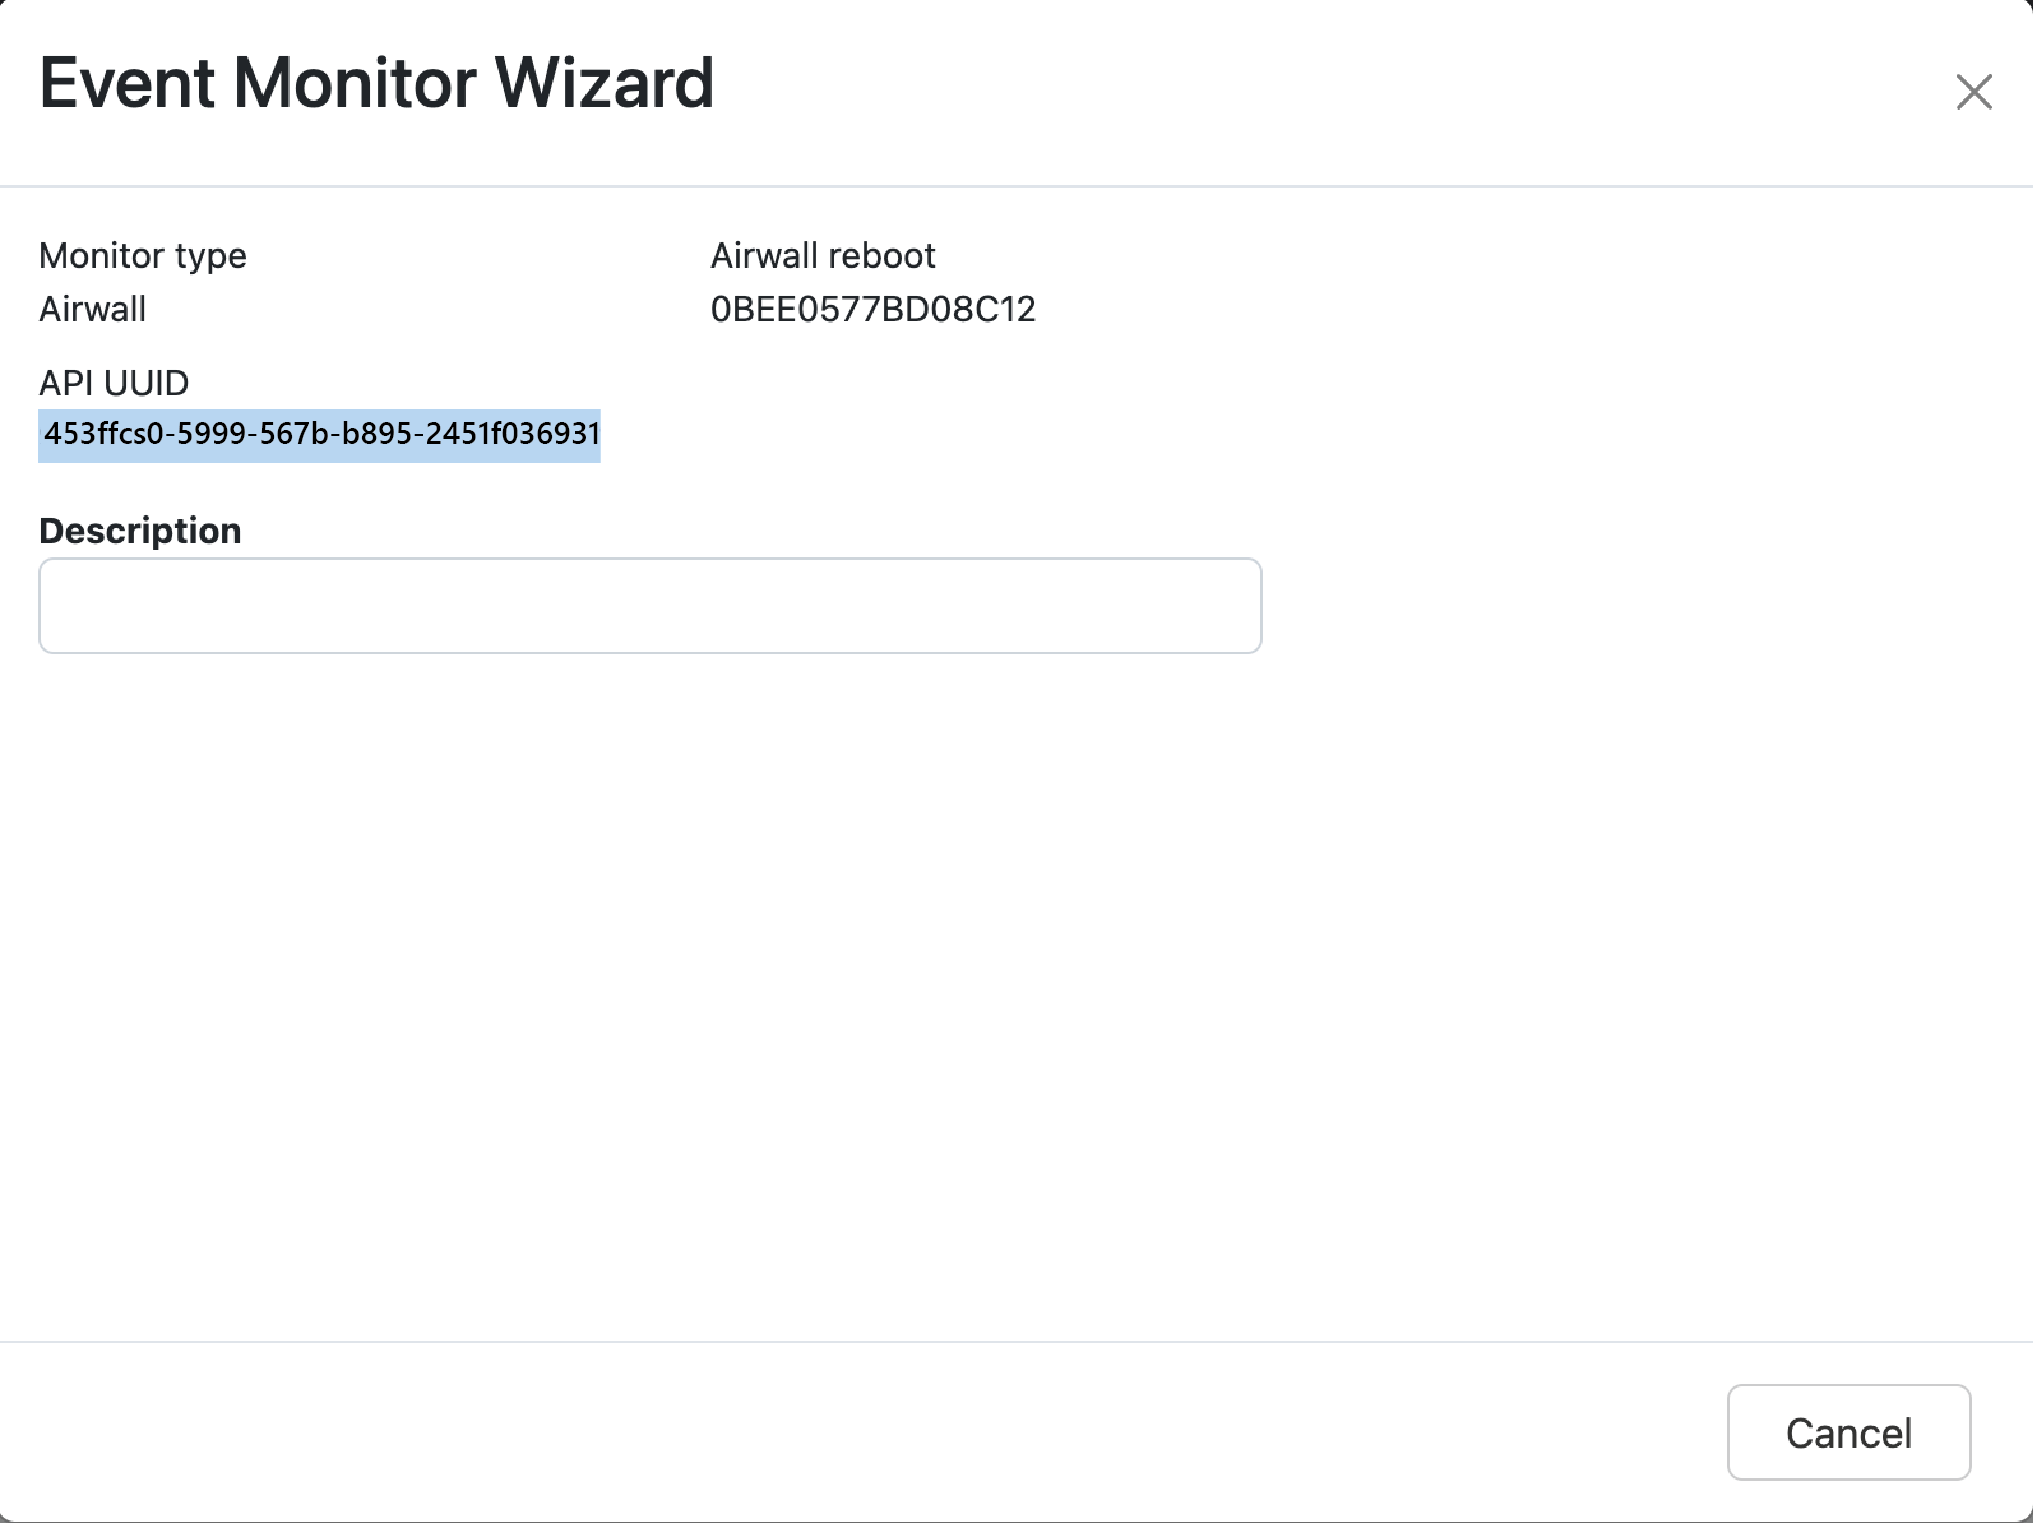 Event monitor wizard